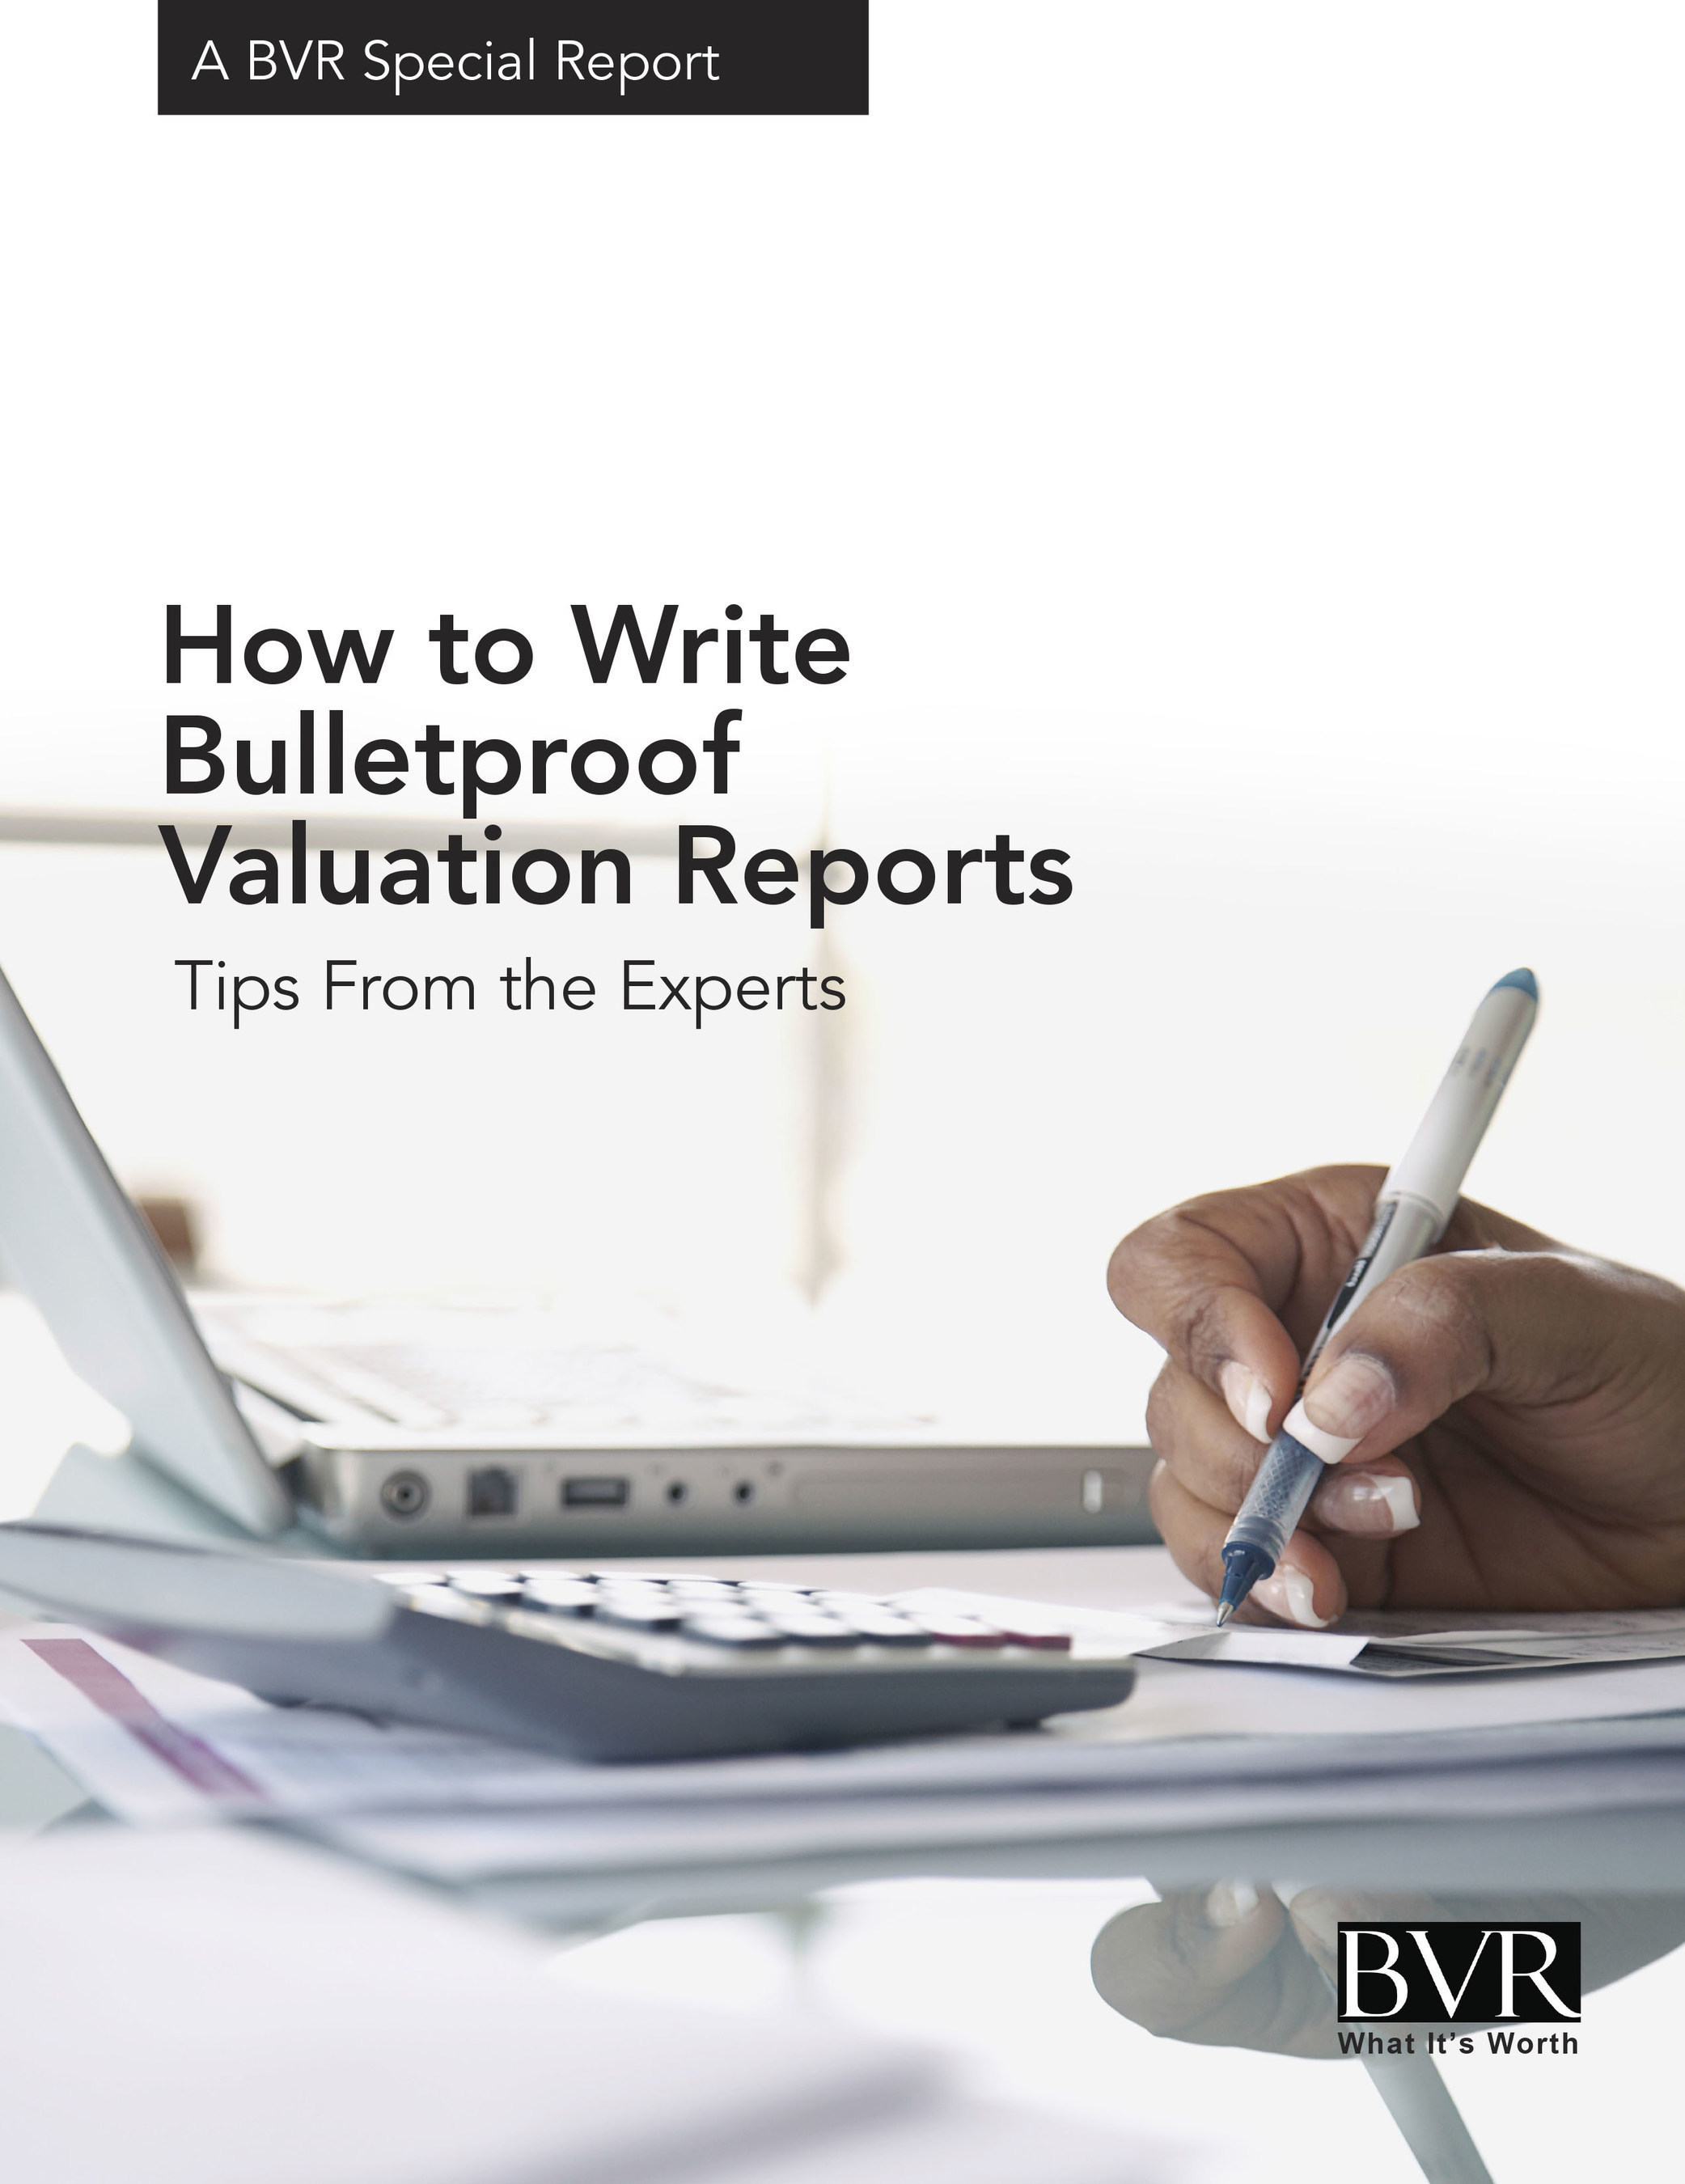 New special report: How to Write Bulletproof Valuation Reports